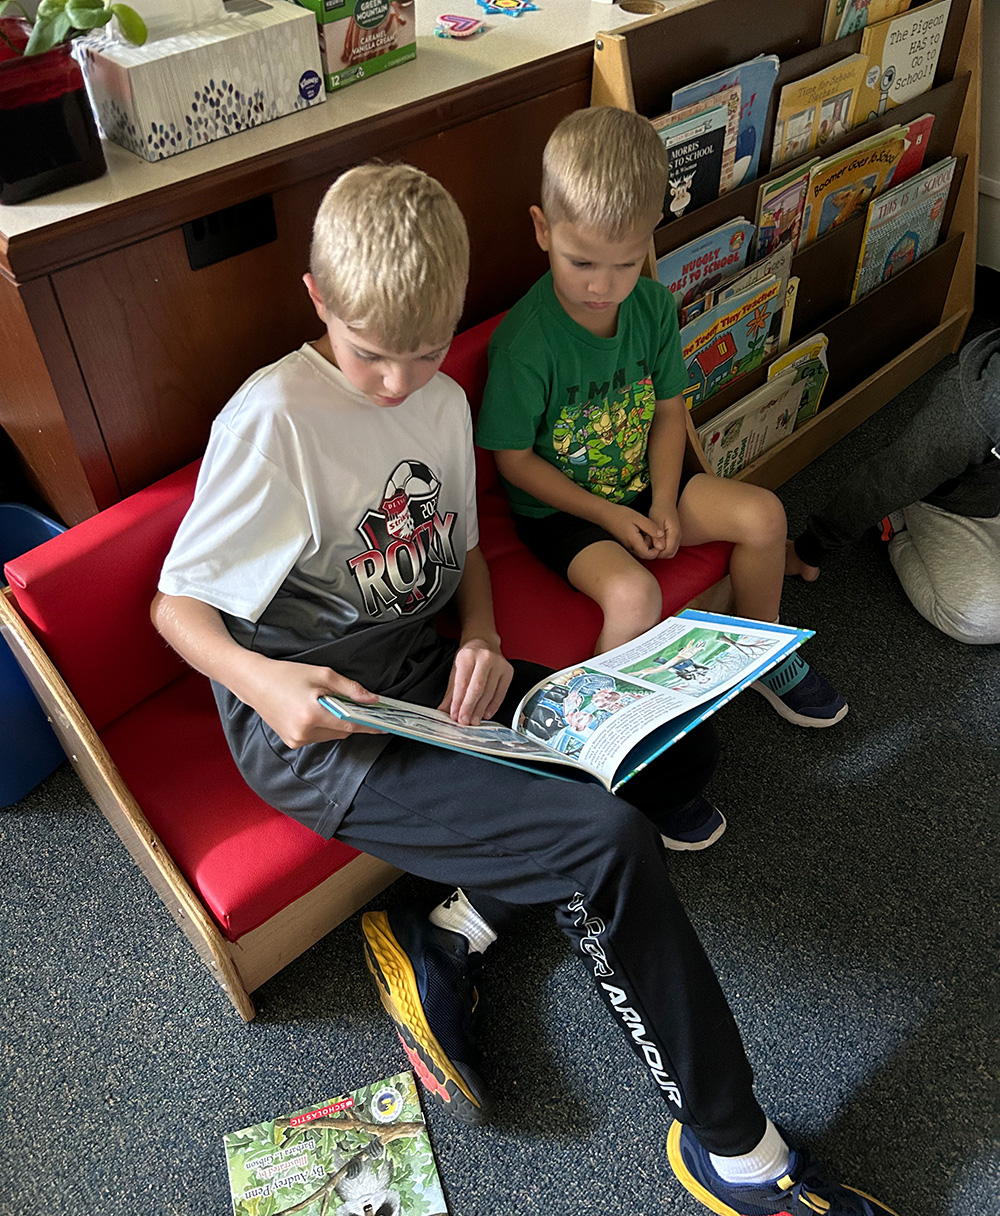 Two boys sit on a red couch at the After School Program, looking at a large picture book together. The older boy, wearing a white and black shirt and black pants, holds the book, while the younger boy in a green shirt and beige shorts attentively watches. Bookshelves are seen in the background.